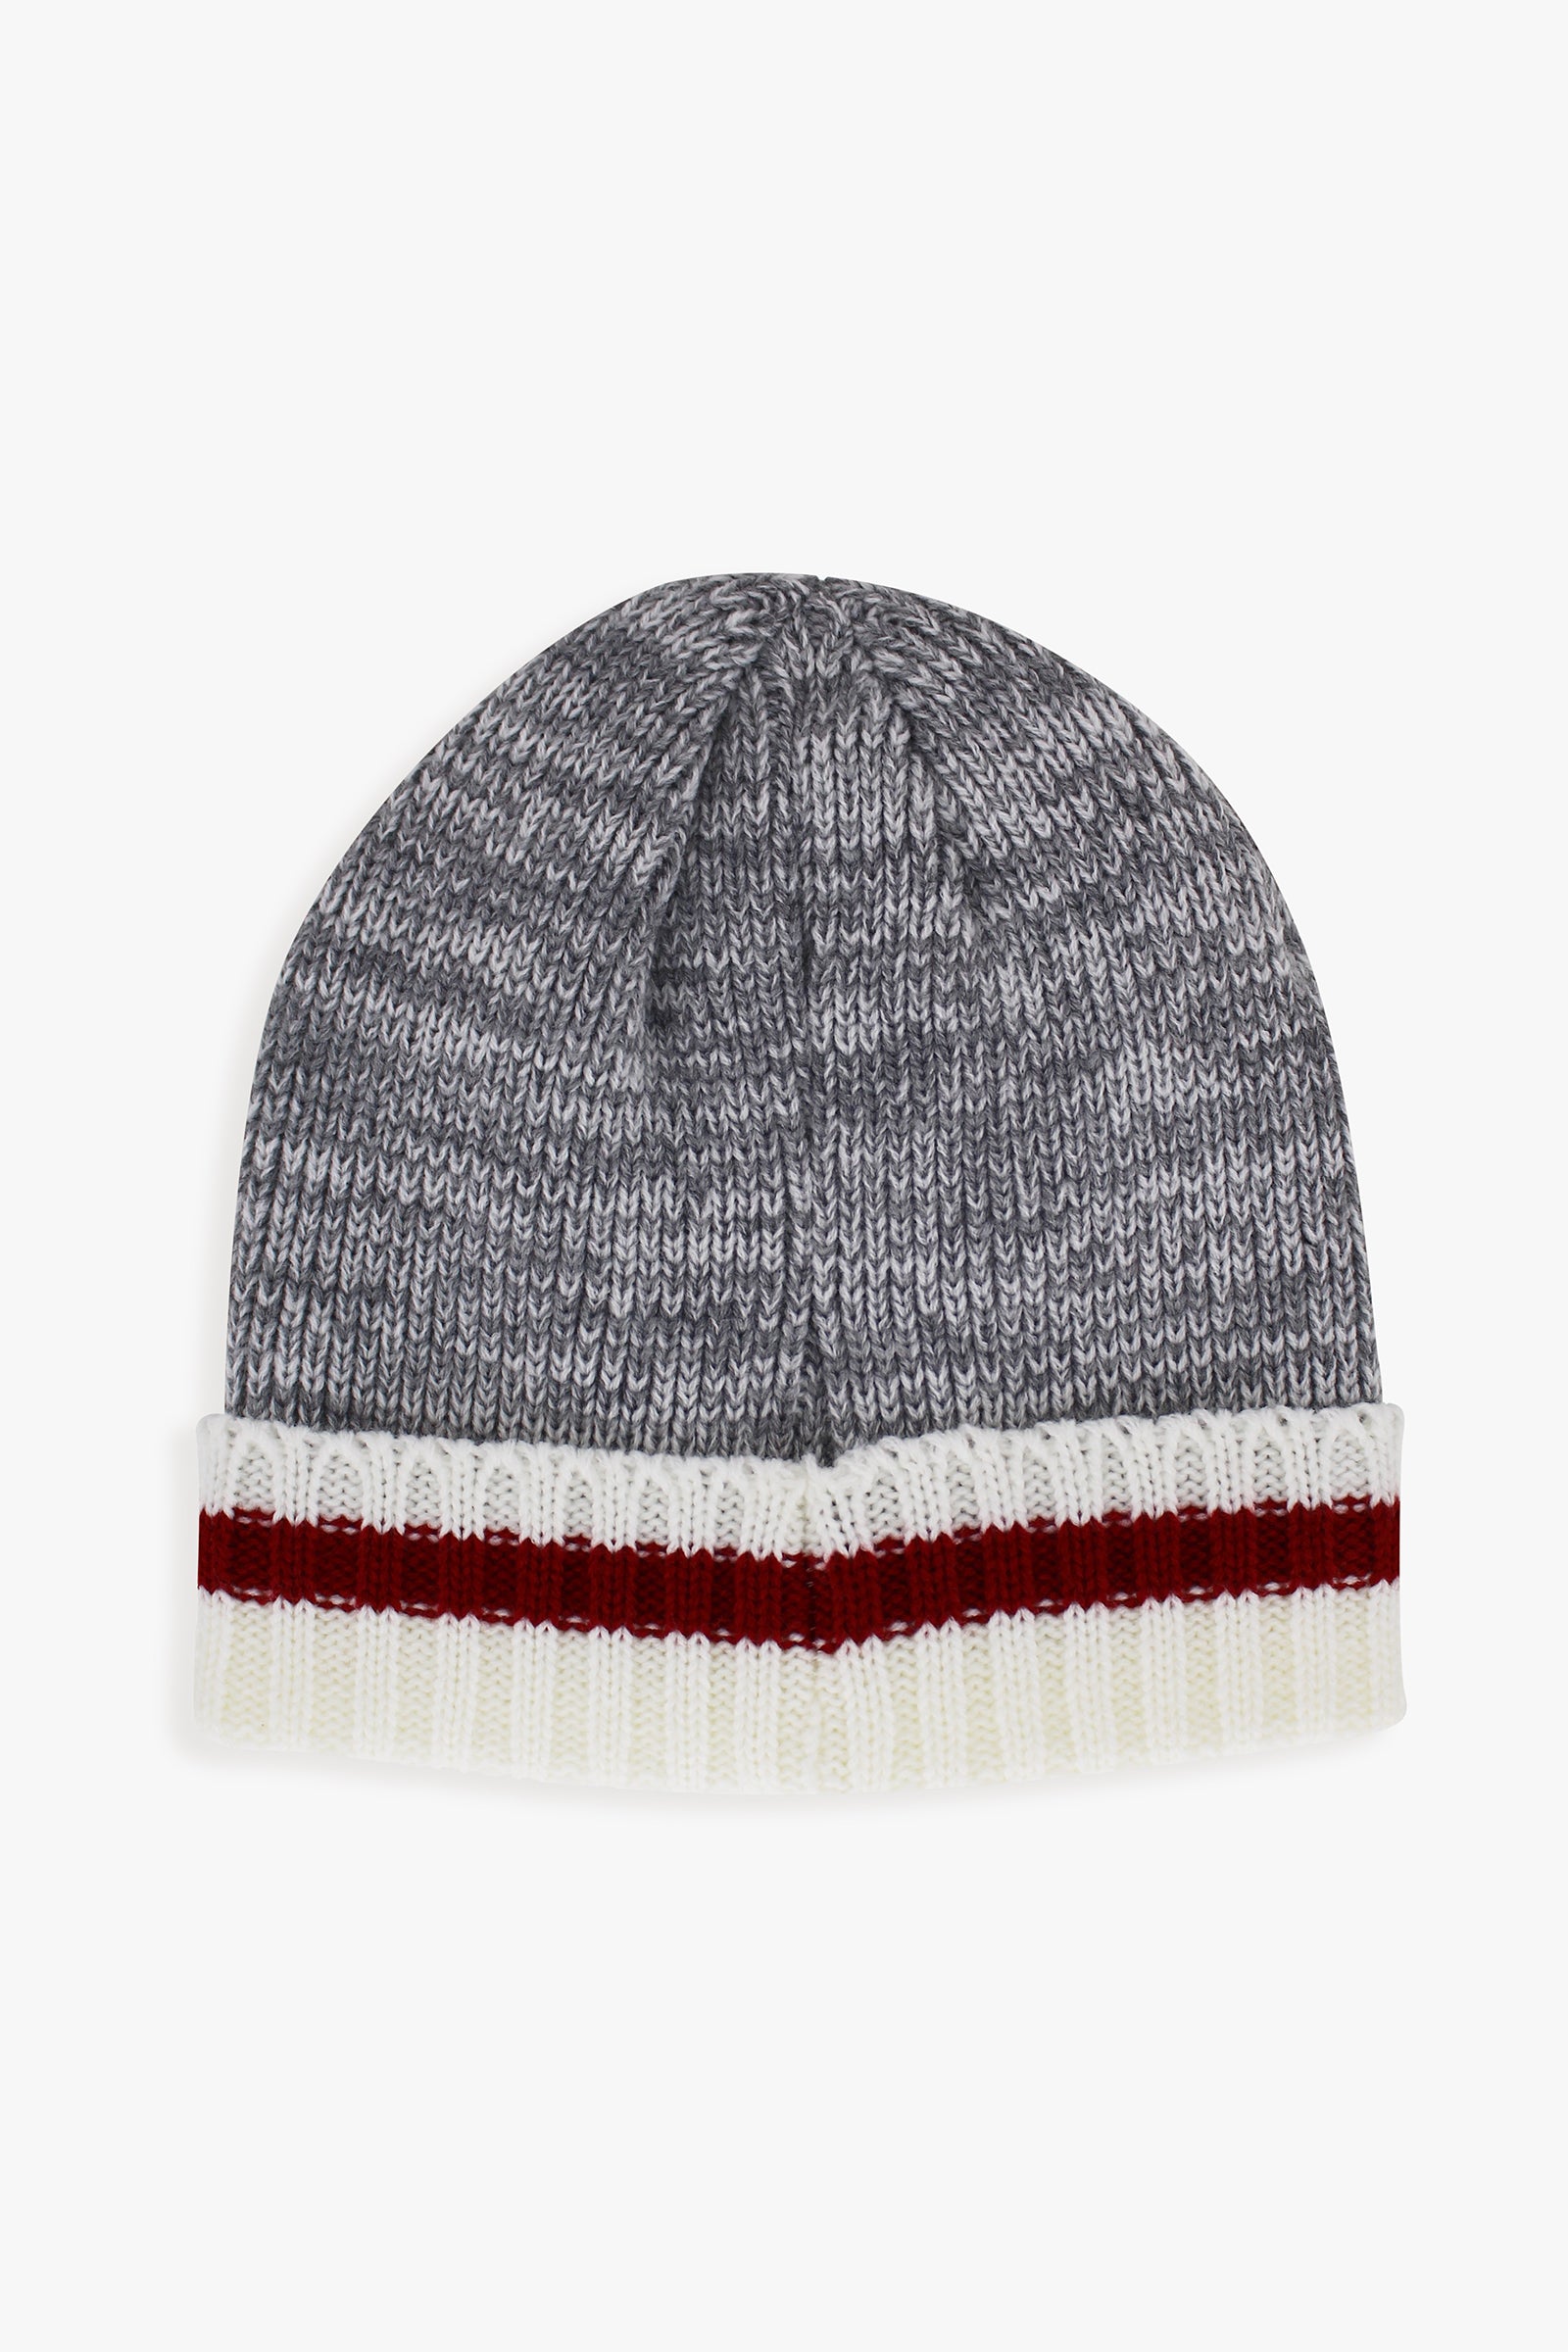 Great Northern Adult Unisex Ribbed Fleece Lined Cuff Beanie